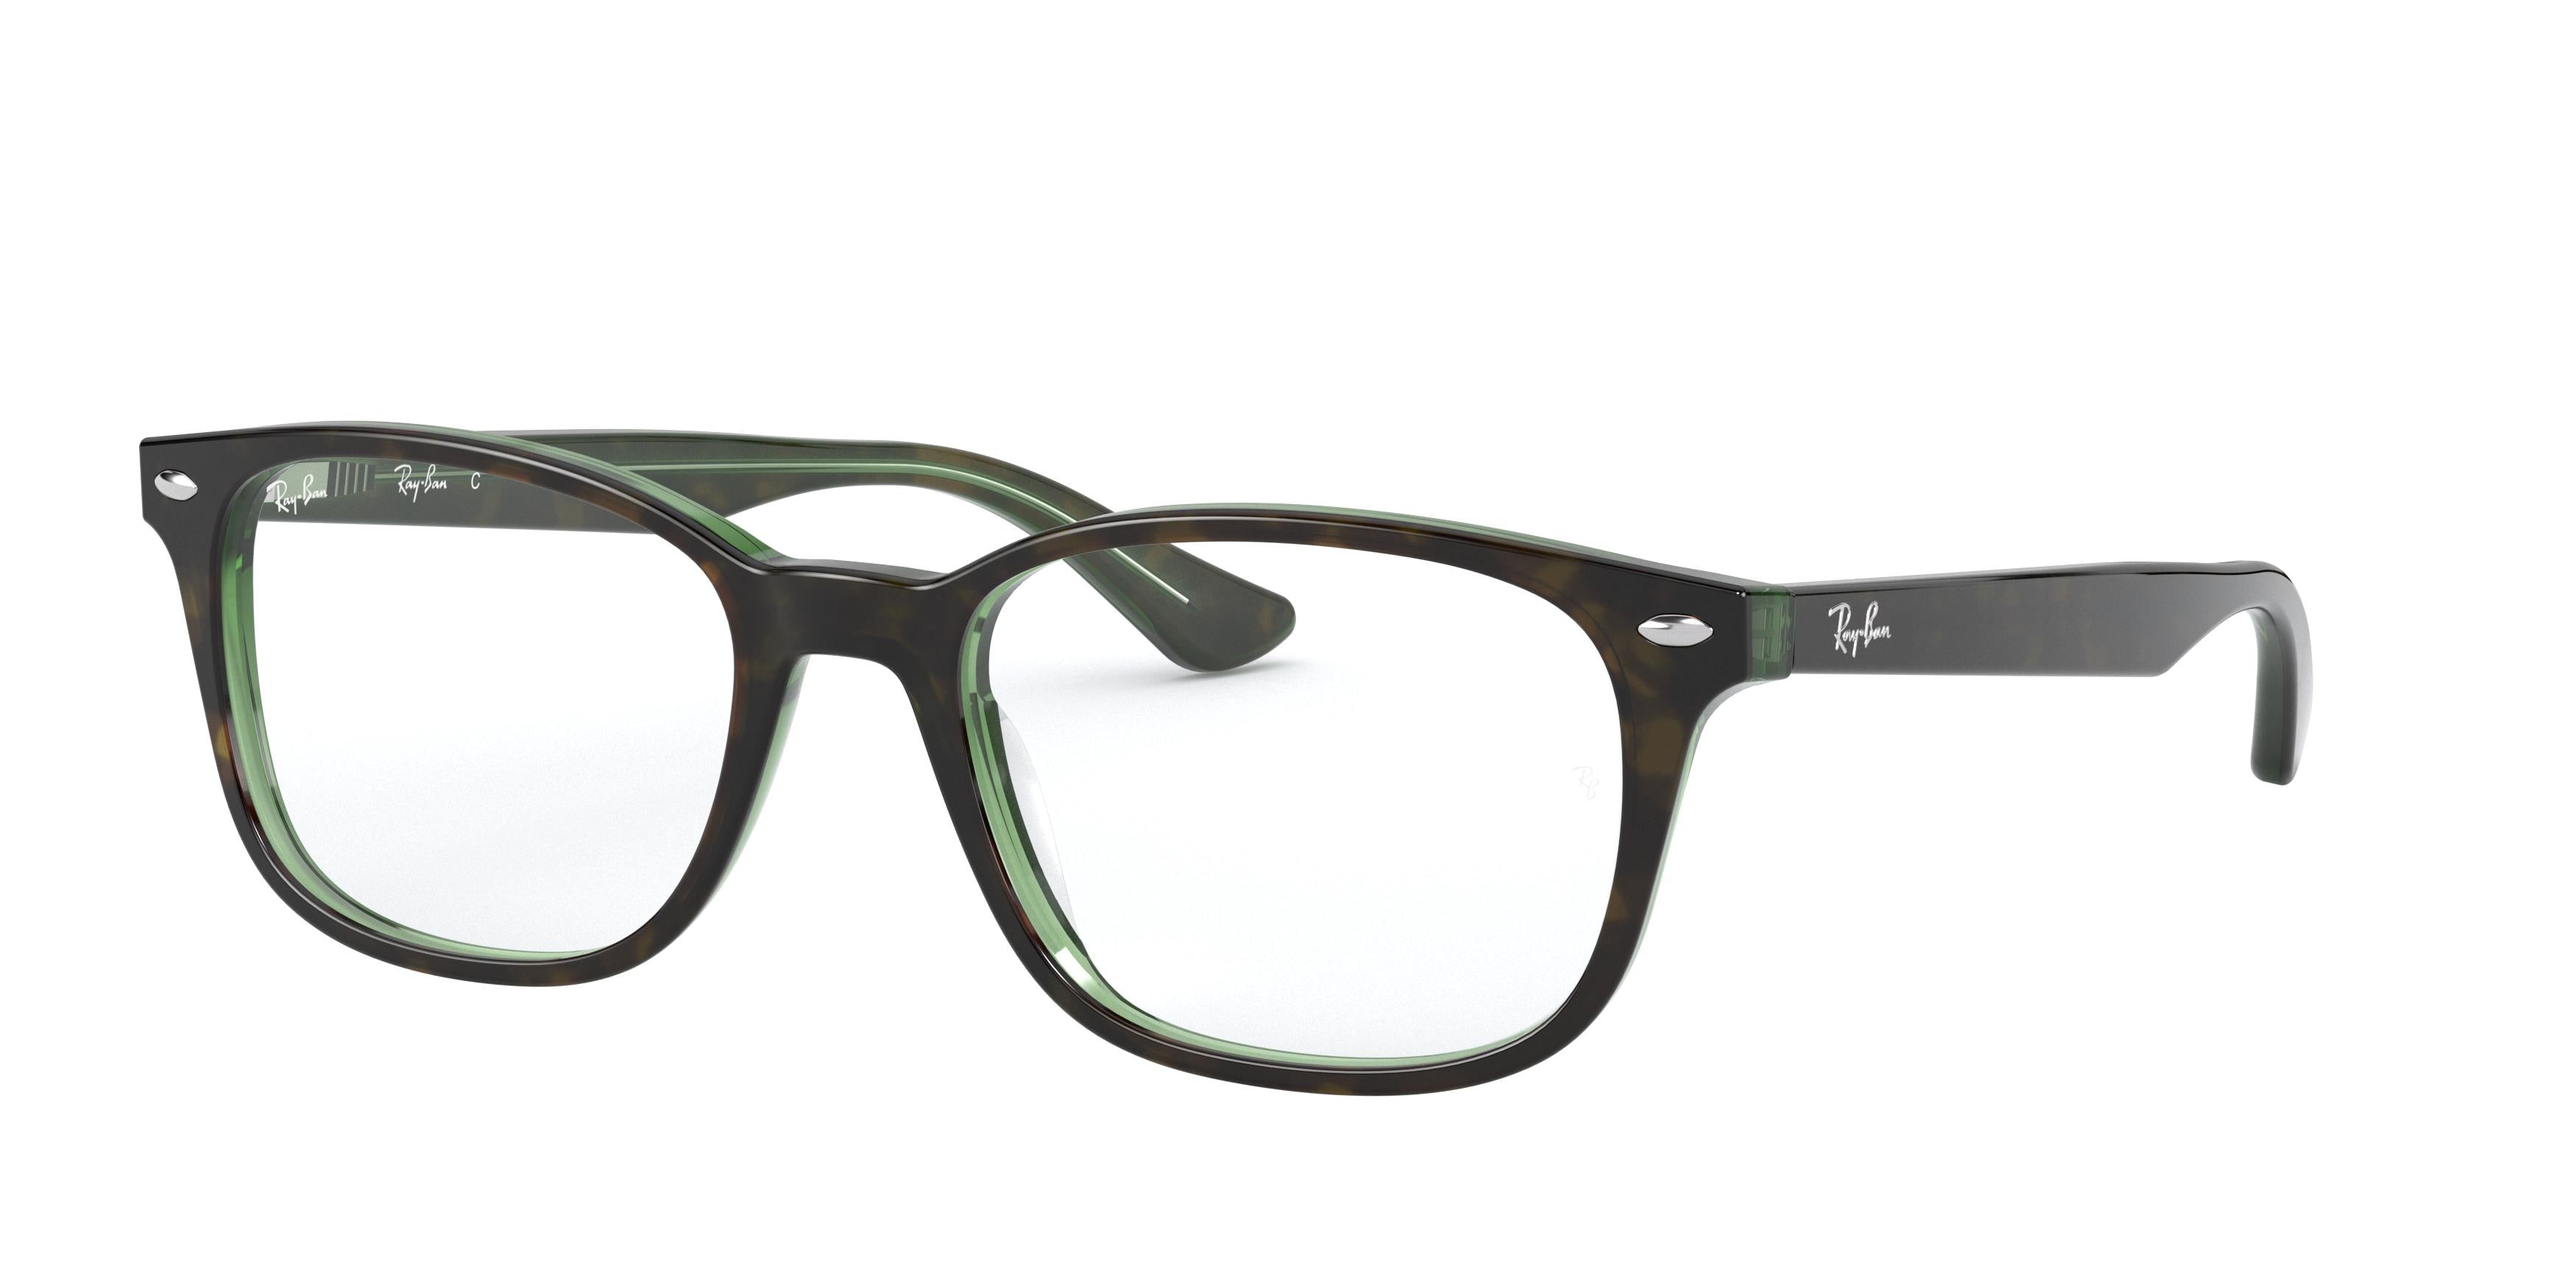 Ray-Ban Optical RX5375 Square Eyeglasses  2383-Havana On Green 53-145-18 - Color Map Brown